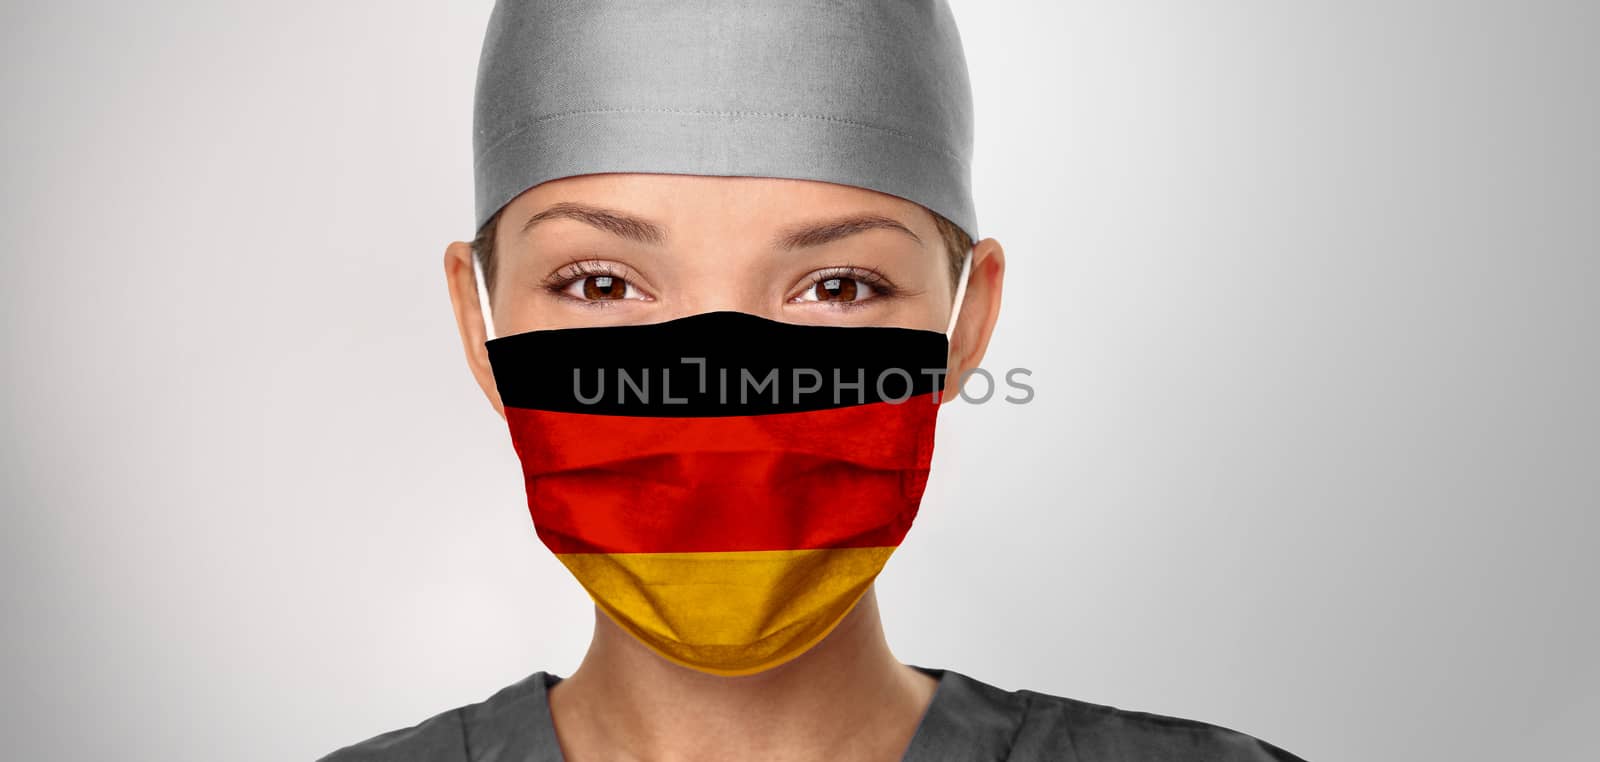 German flag on Asian doctor woman wearing mask. COVID-19 outbreak in Germany. Graphic design illustration print on medical PPE.